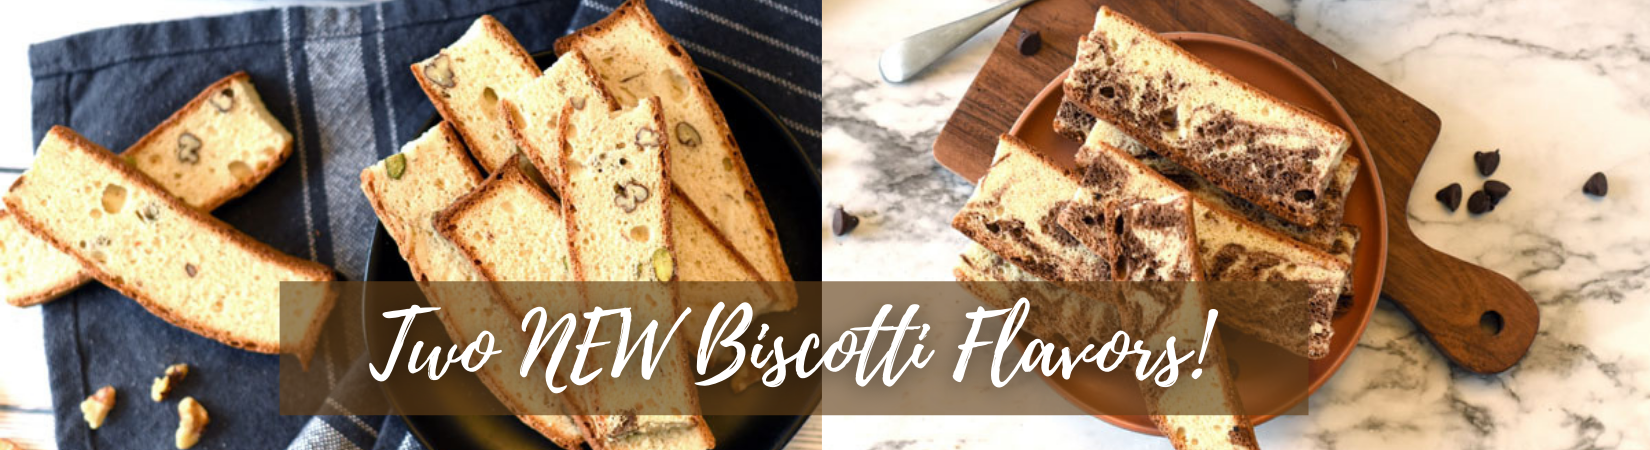 two new biscotti flavors